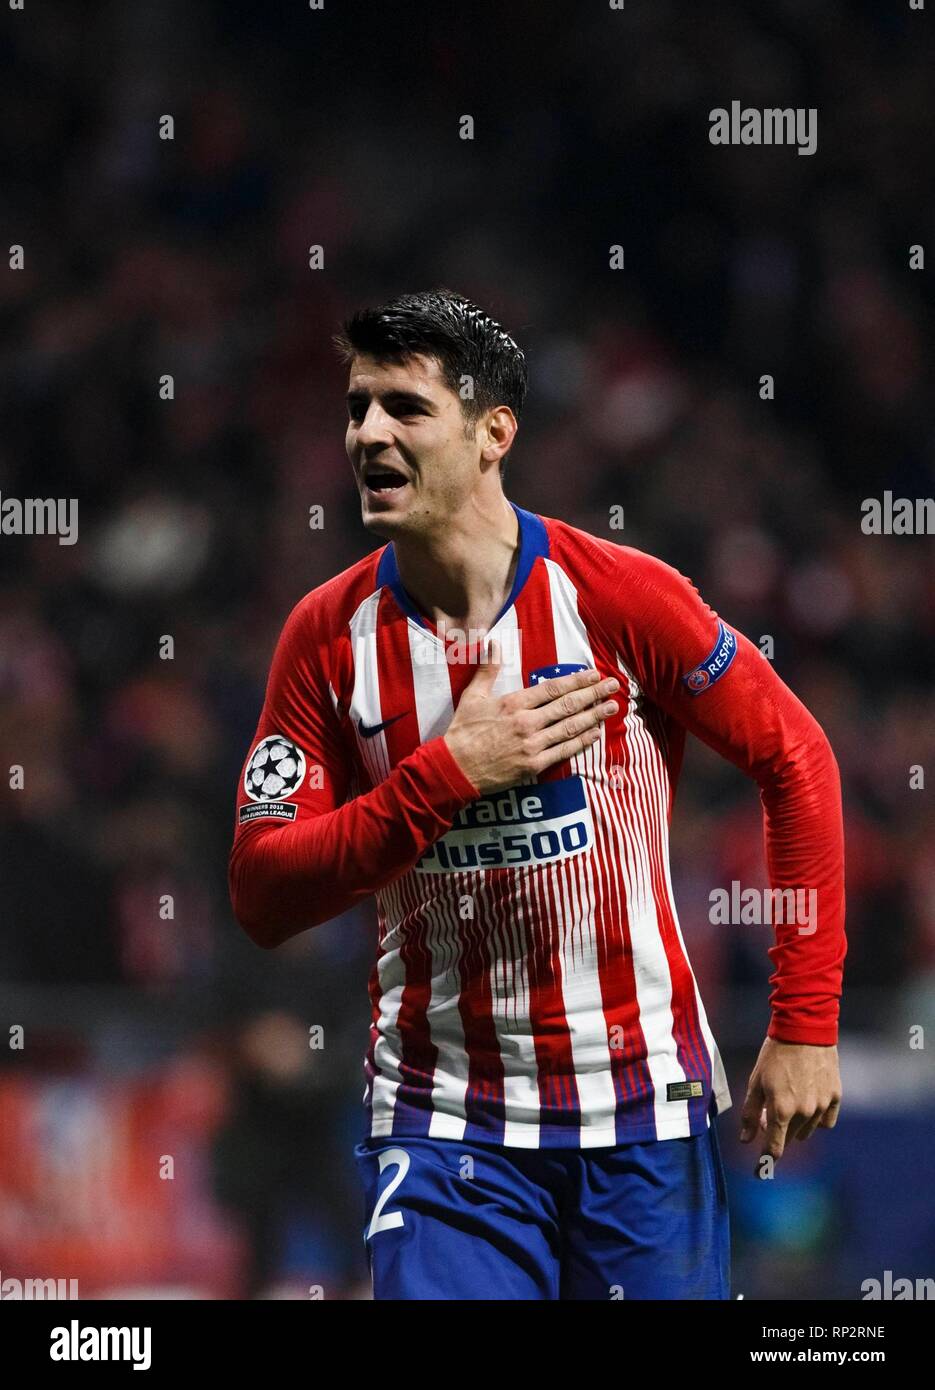 Madrid, Spain. 20th Feb, 2019. Alvaro Morata of Atletico de Madrid  celebrates a goal during the UEFA Champions League 2018/19 Round of 16  First Leg match between Atletico de Madrid and Juventus,